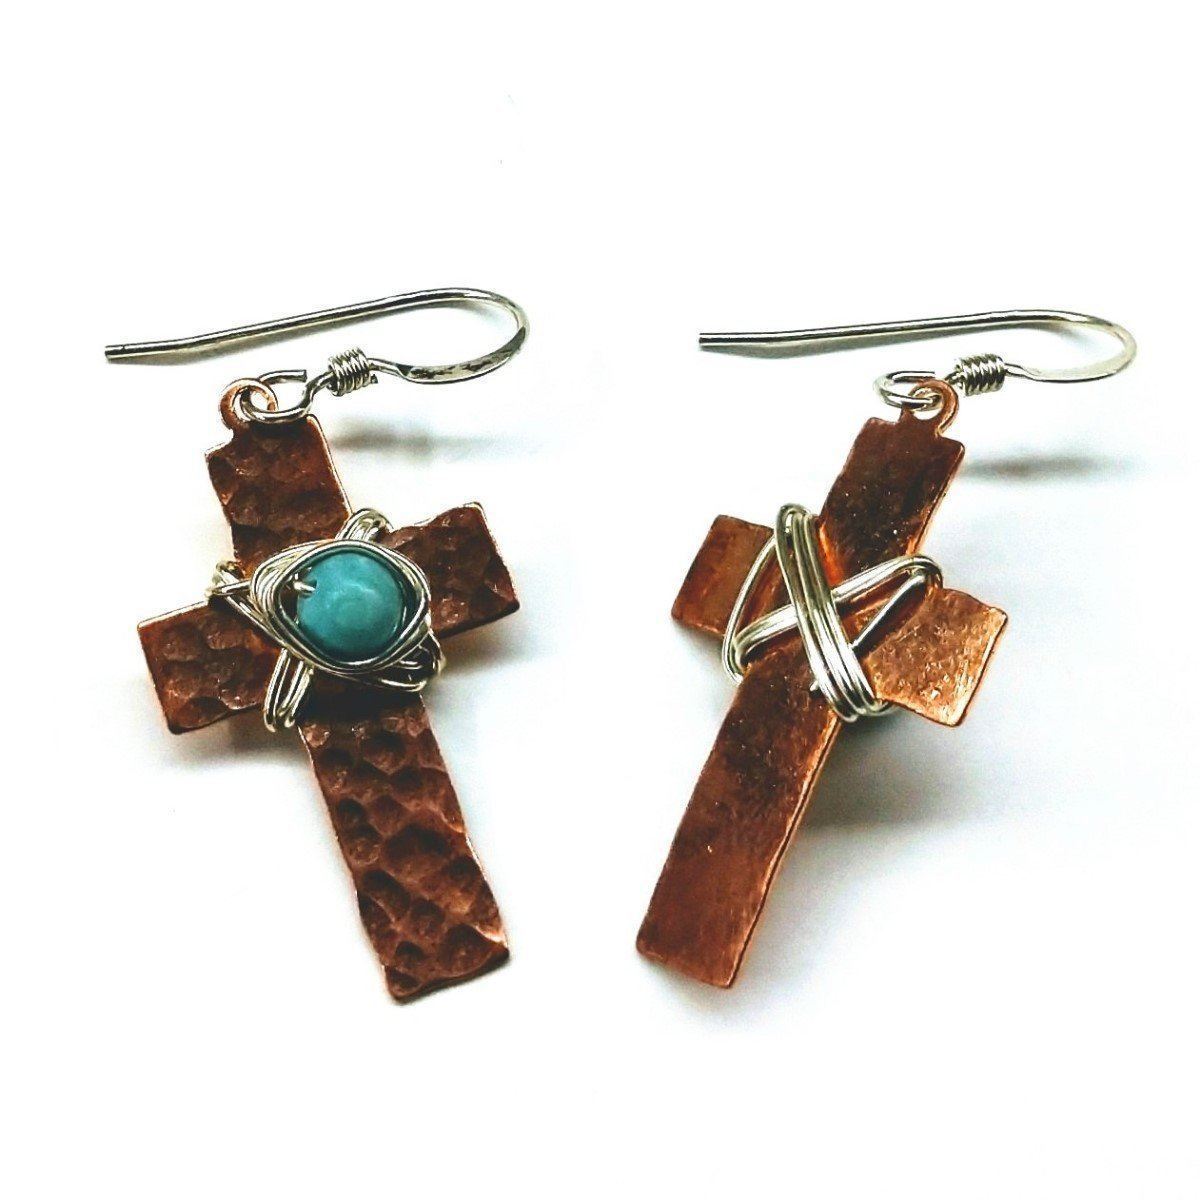 Handcrafted Copper Cross Earrings with Turquoise Beads - 1.5" Length - Earrings - Bijou Her -  -  - 